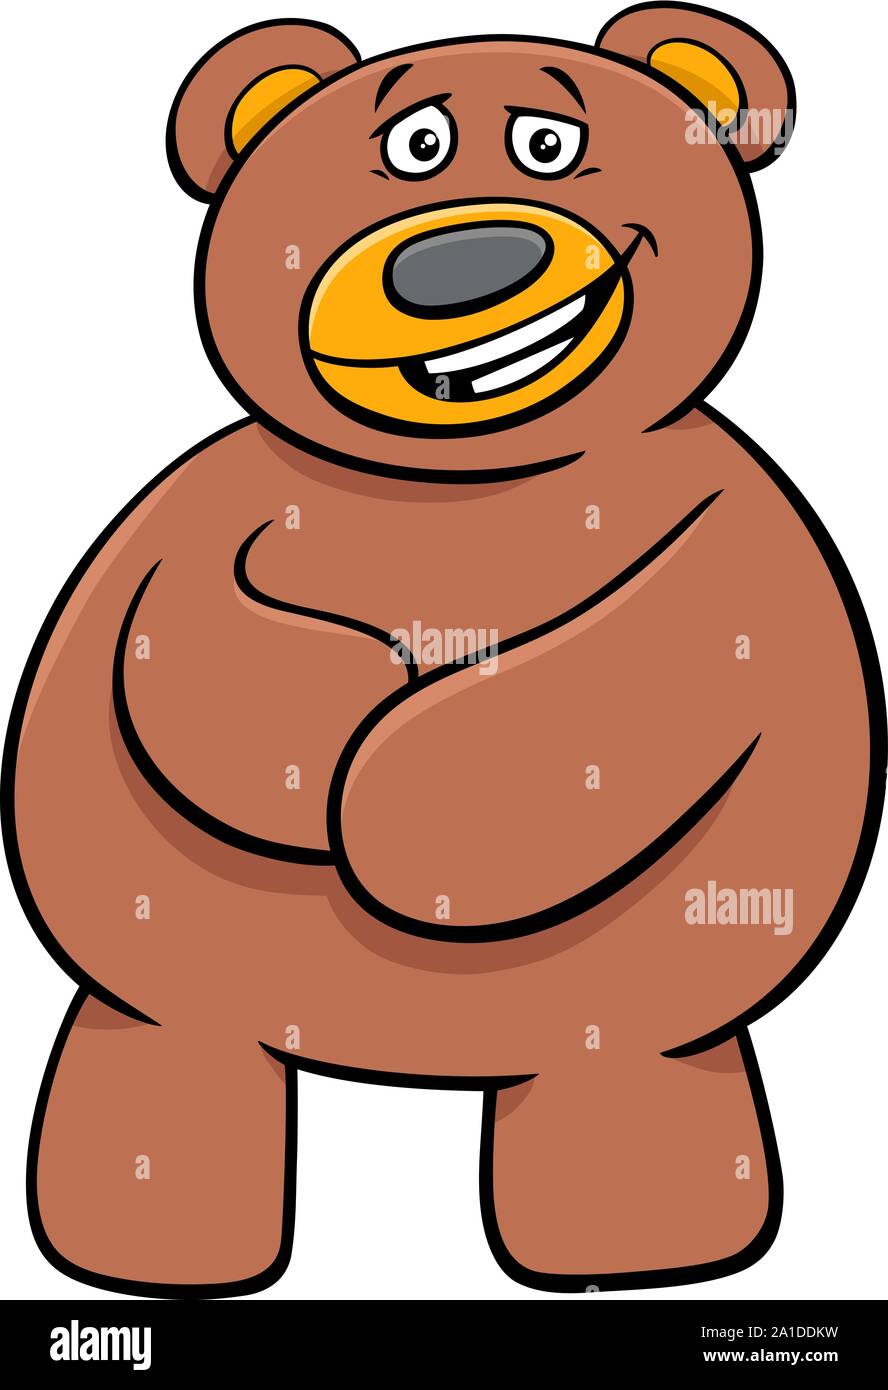 Clip art and cartoons animals hi-res stock photography and images - Alamy